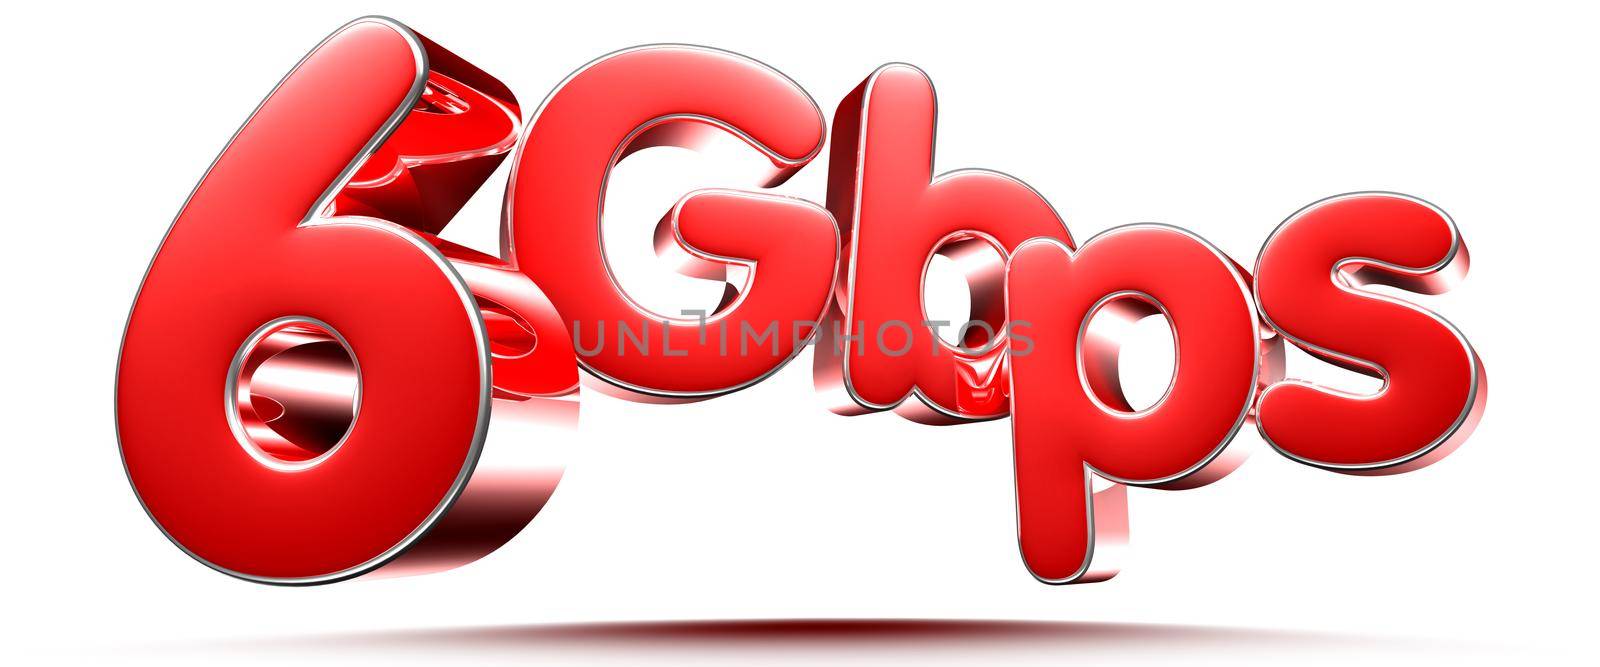 3D illustration 6 Gbps red circles isolated on a white background with clipping path.